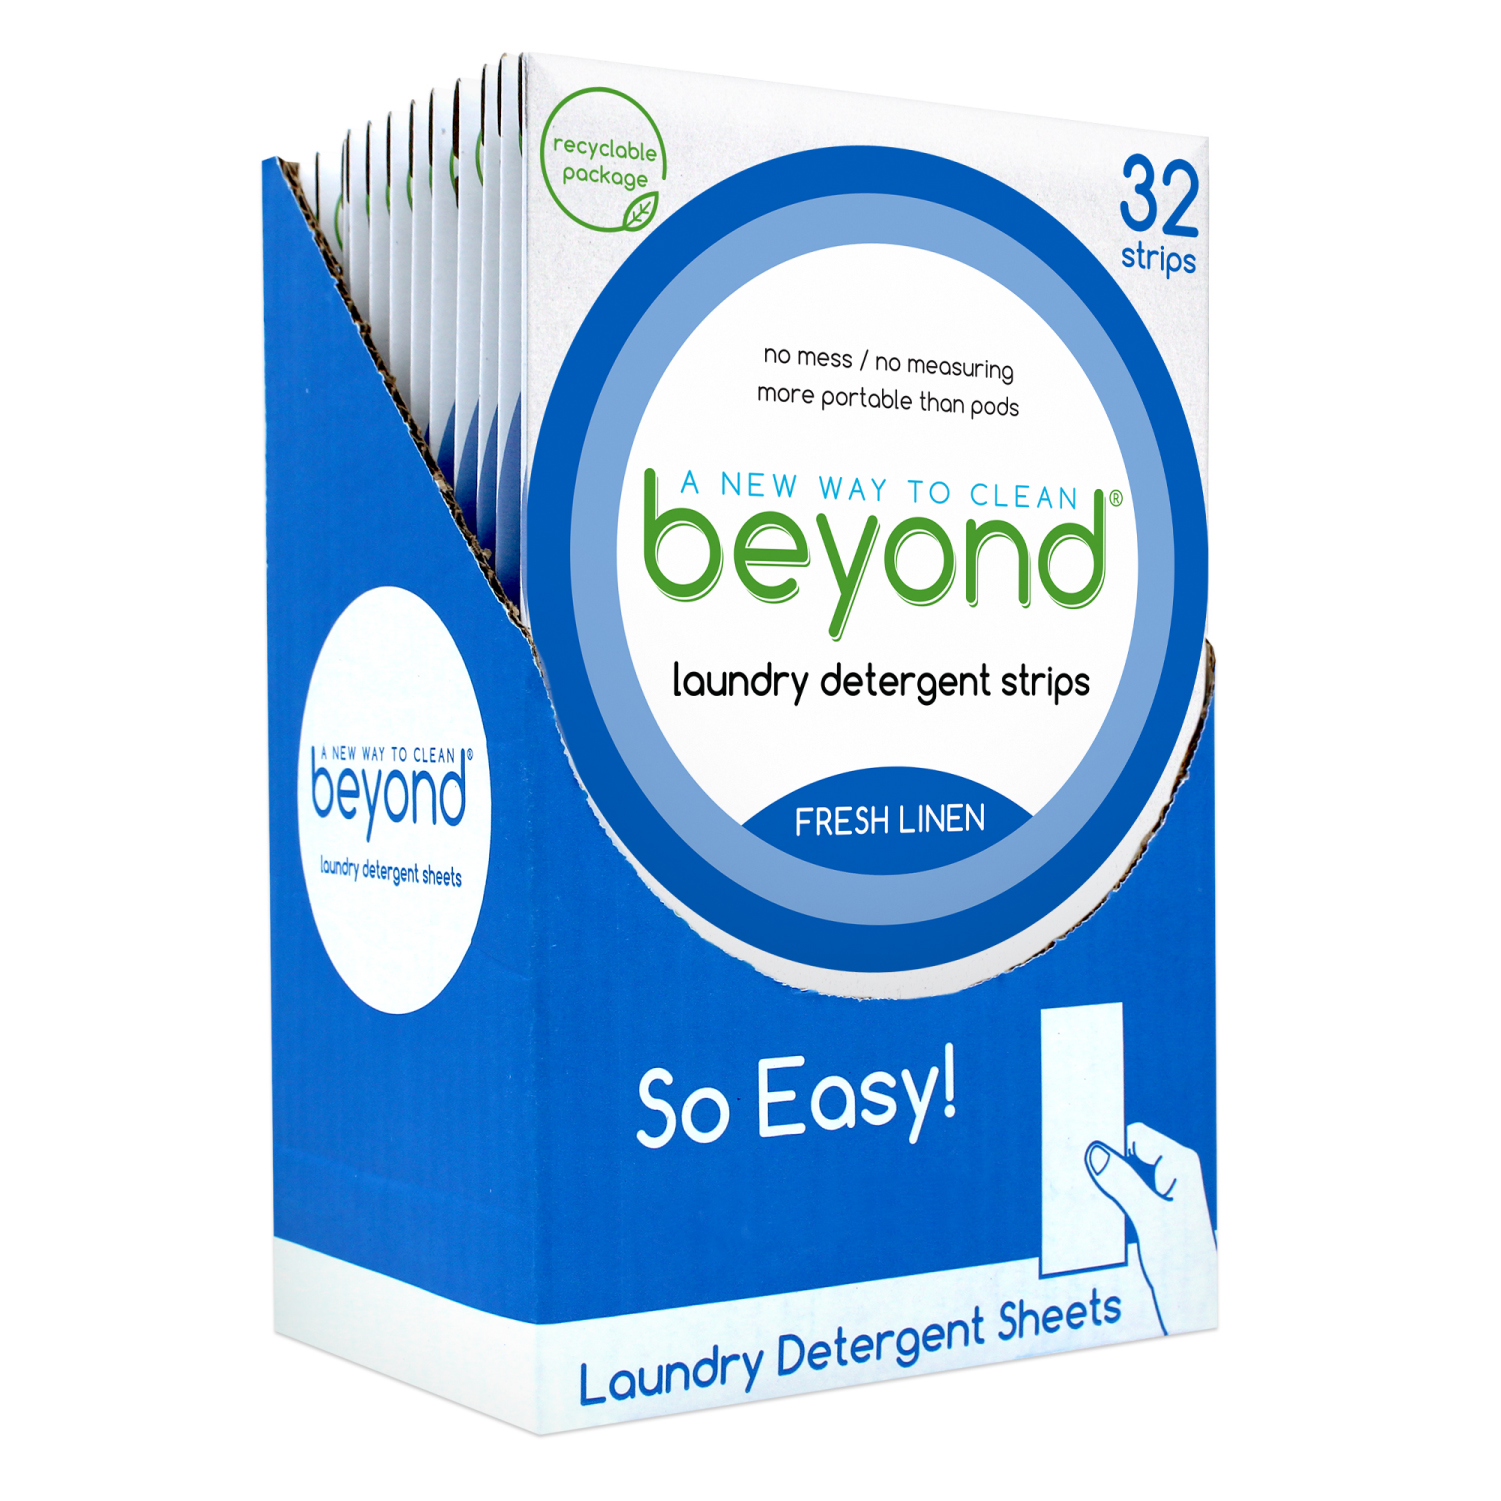 Beyond Laundry Detergent Strips [32 strips] - Fresh Linen - image 4 of 9